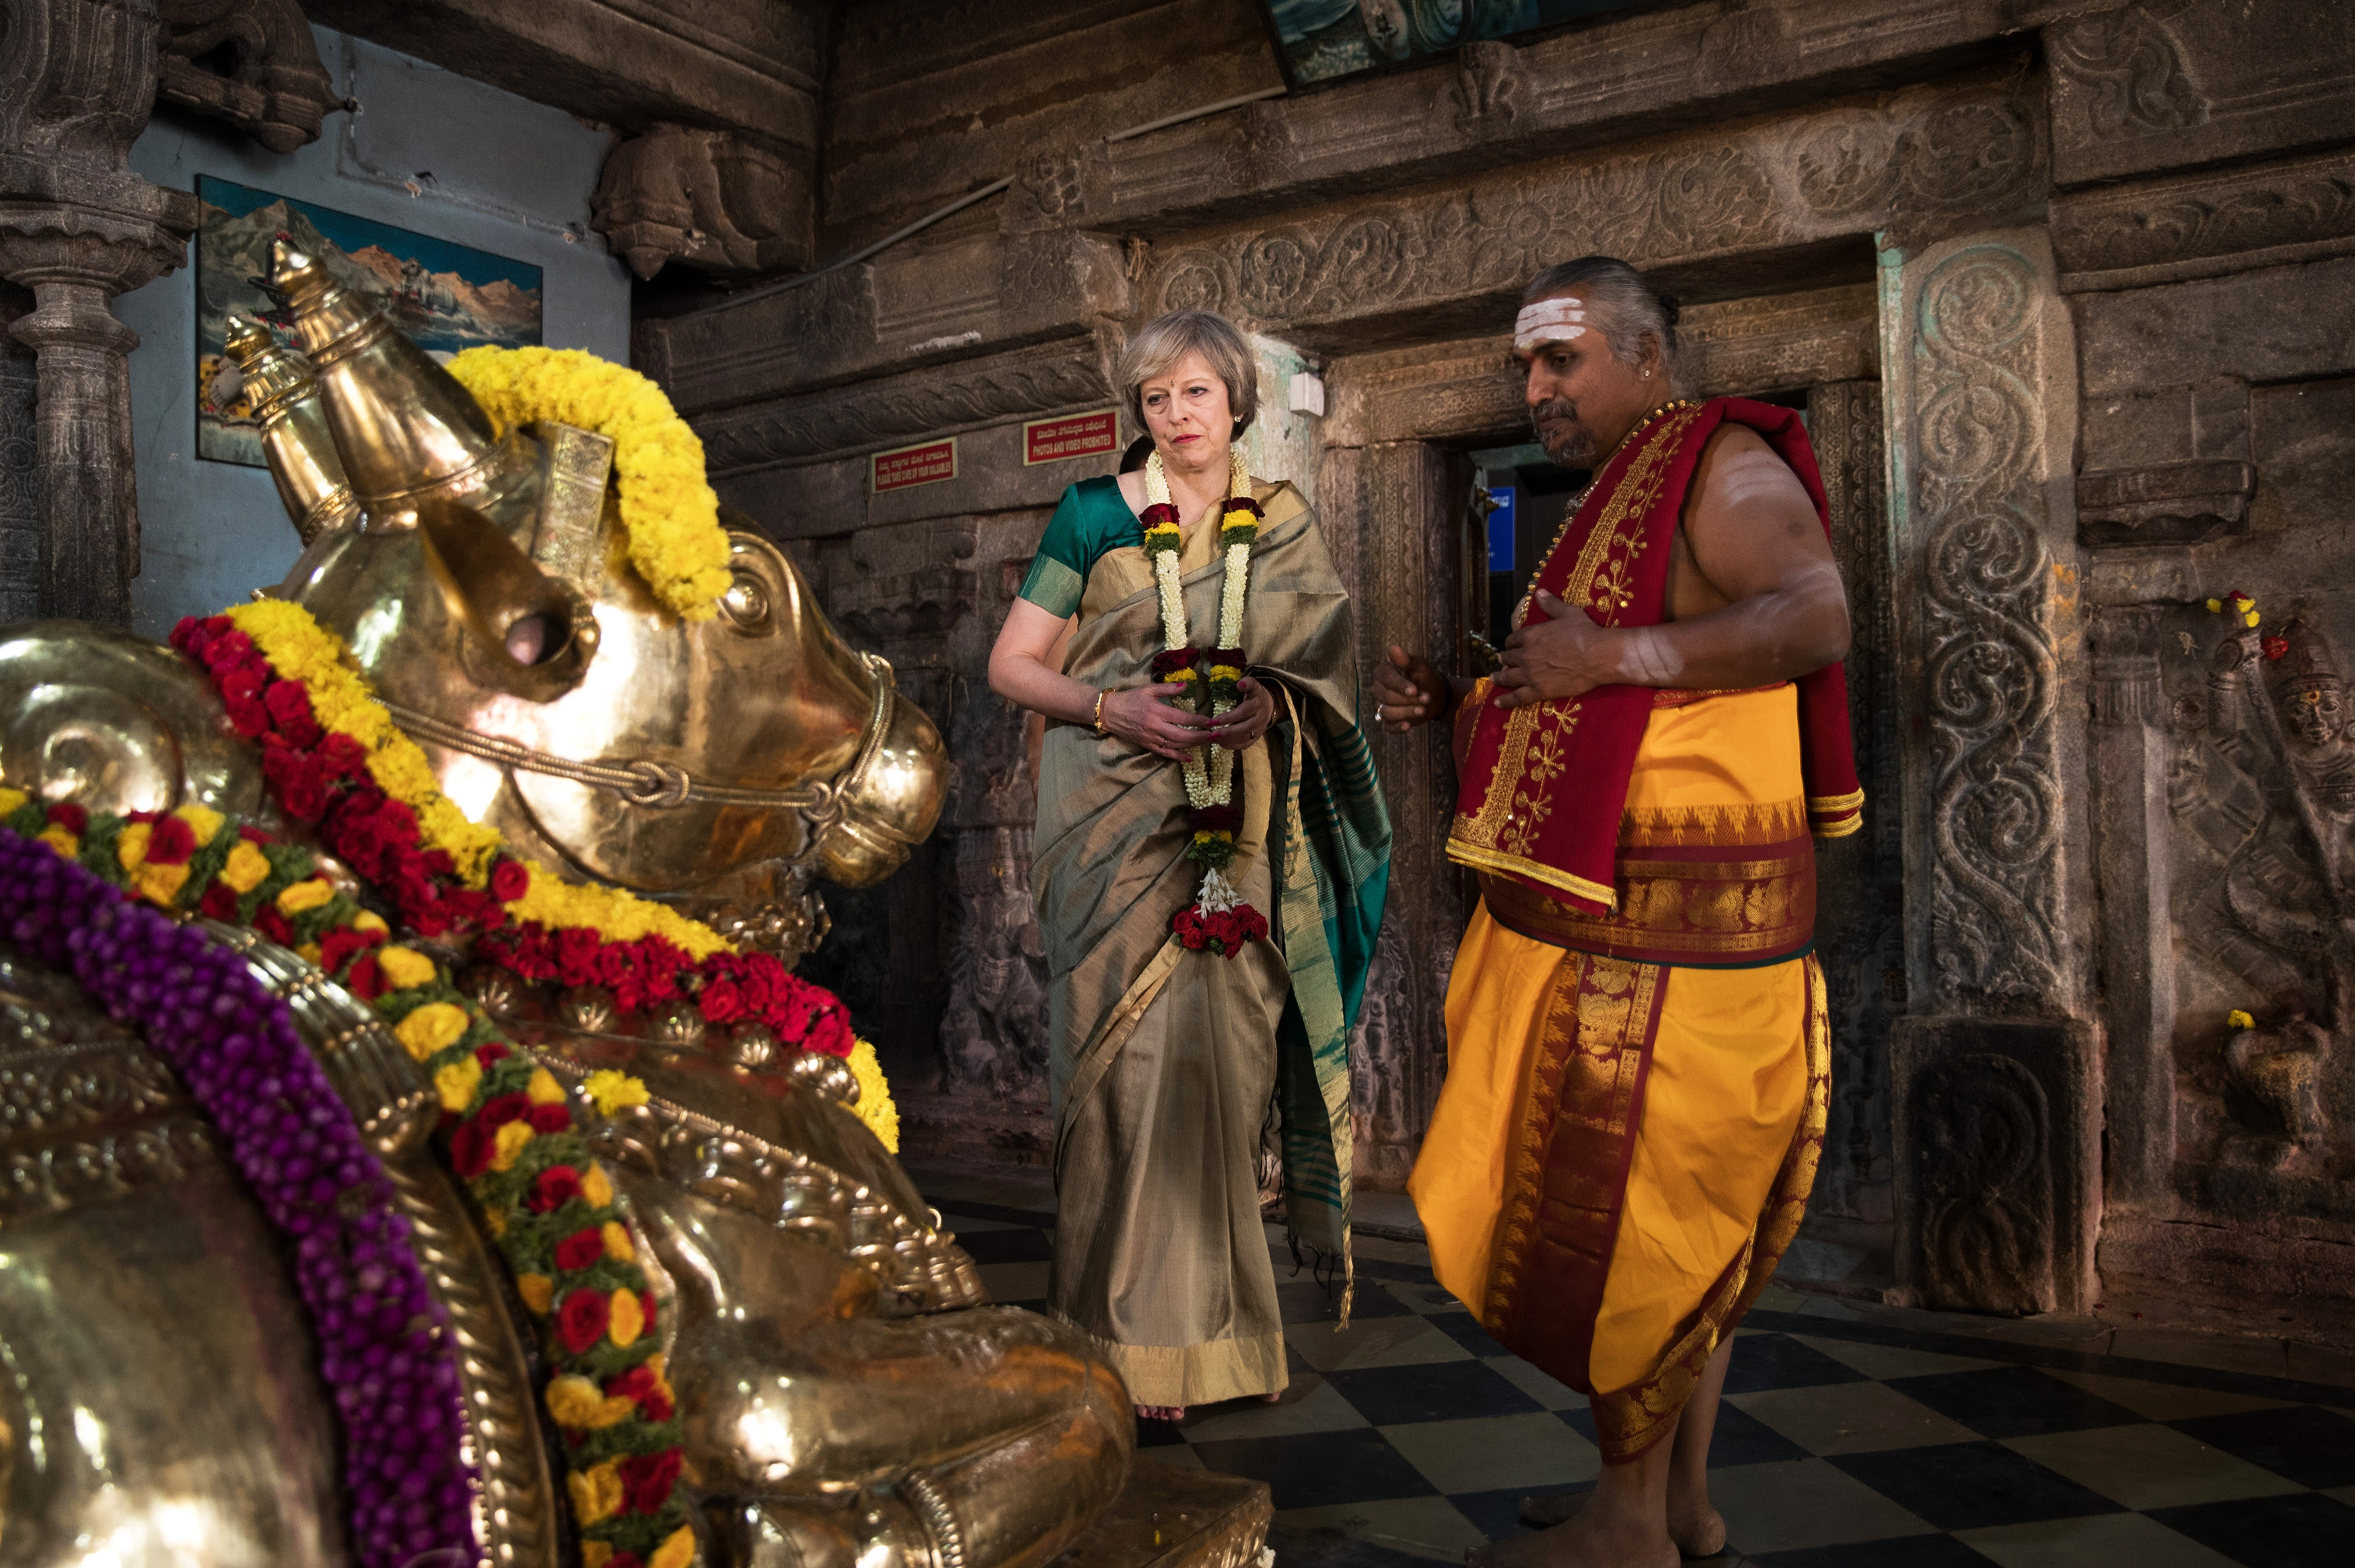 British Prime Minister Theresa May is welcomed to the Sri Someshwara Temple on November 8, 2016 in Bangalore, India. Mrs May is in India on a two day trade mission to reconnect the UK with the Commonwealth during her first trip since taking office. Yesterday the Prime Minister met with Indian Prime Minister Narendra Modi.  (Photo by Dan Kitwood/Getty Images)